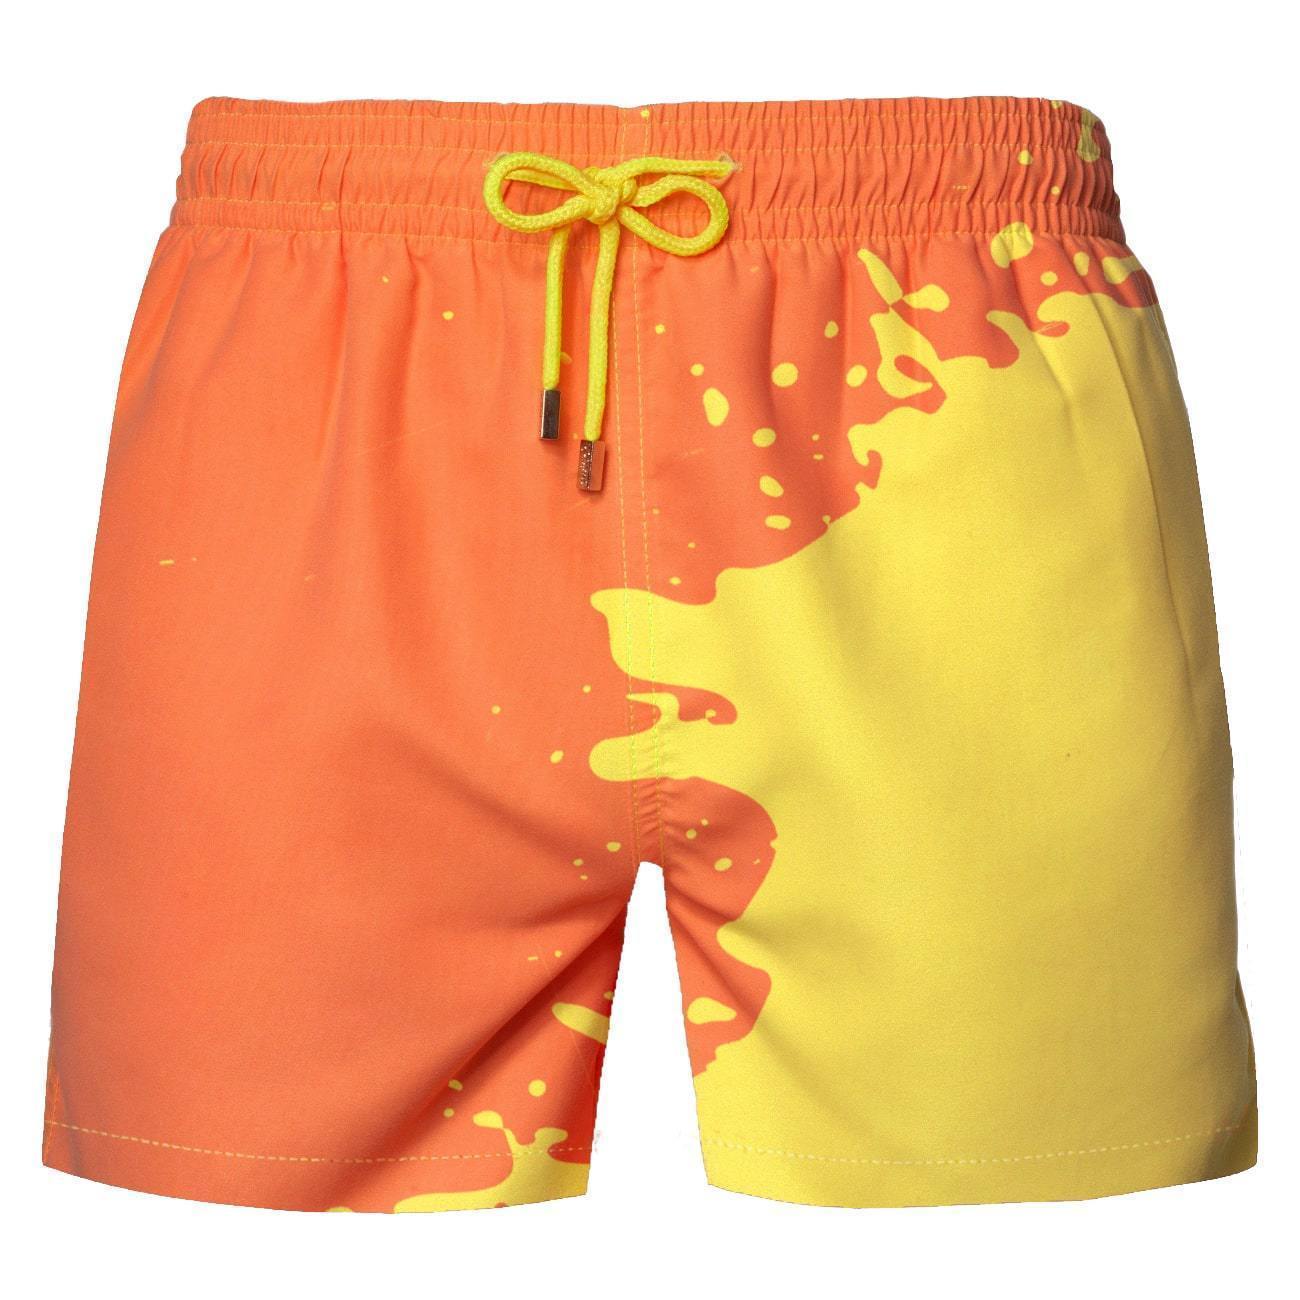 US$ 17.58 - HYPER SWITCHS COLOR CHANGING SWIM TRUNKS - www.sheinv.com